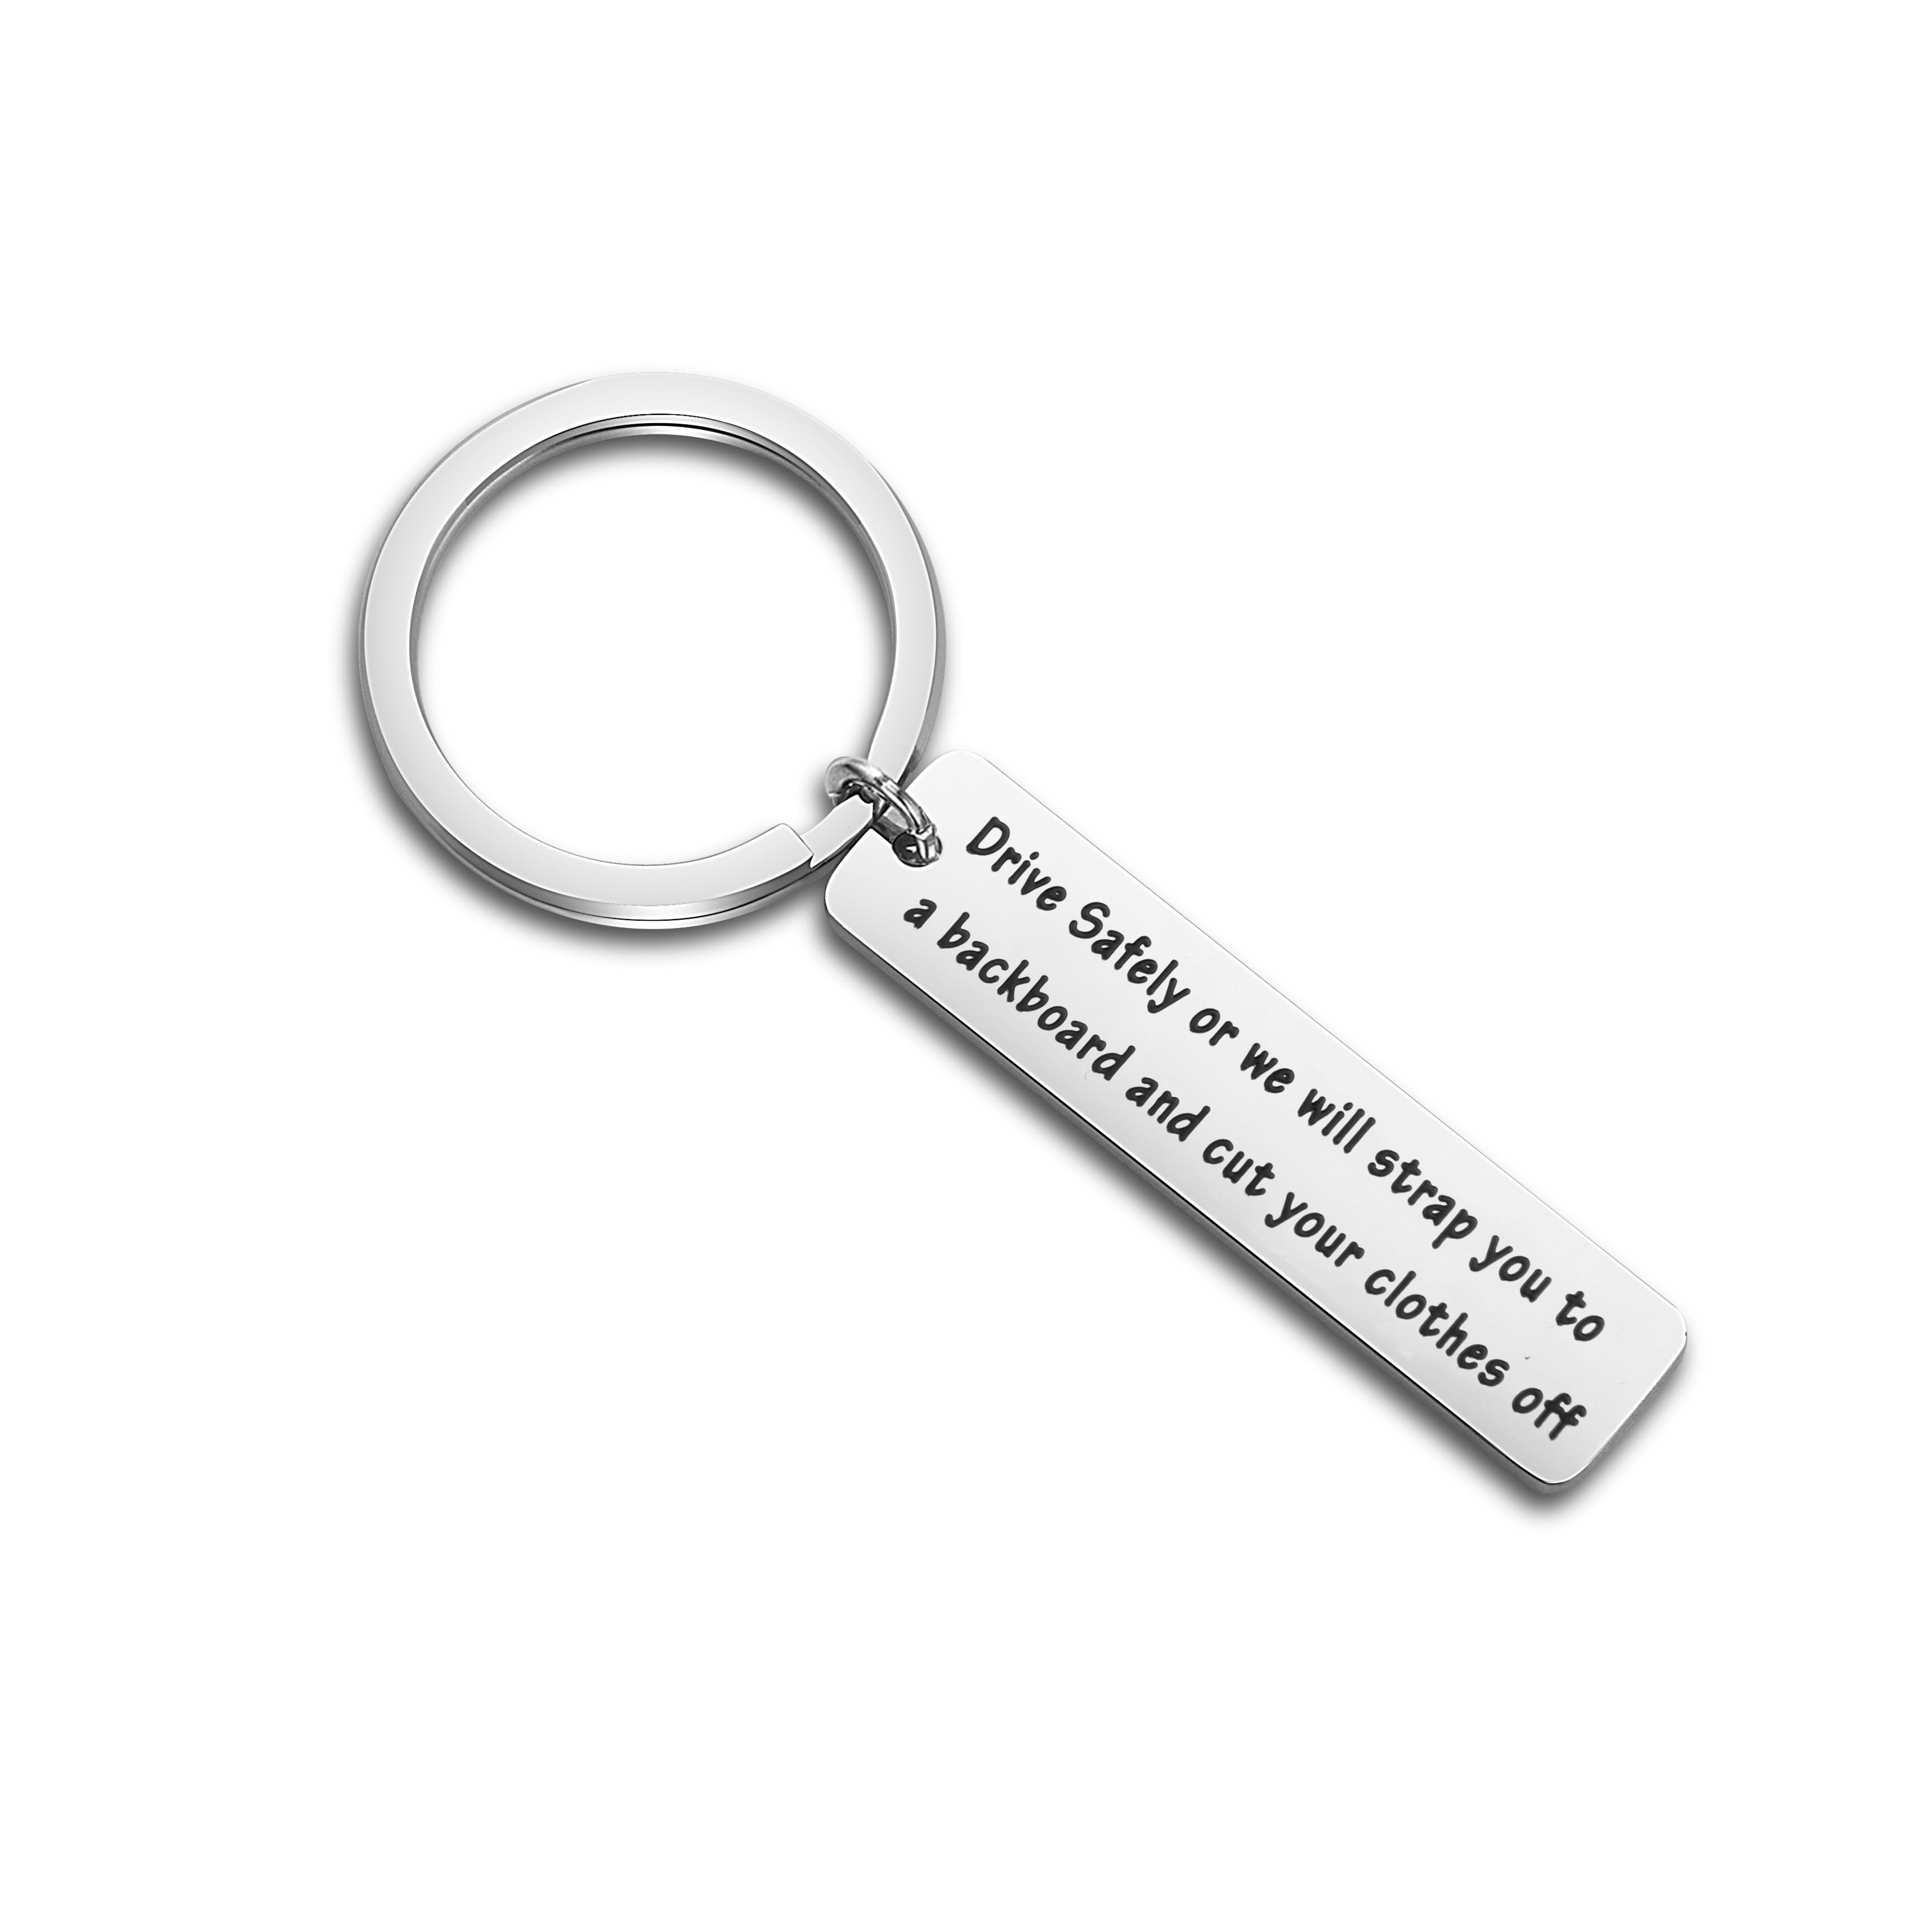 Dad Gift Valentines Day Gifts Udobuy Drive Safe Keychain I Need You Here with Me Husband Gift Boyfriend Gift Trucker Gift Sweet 16 Gift Men Gift 